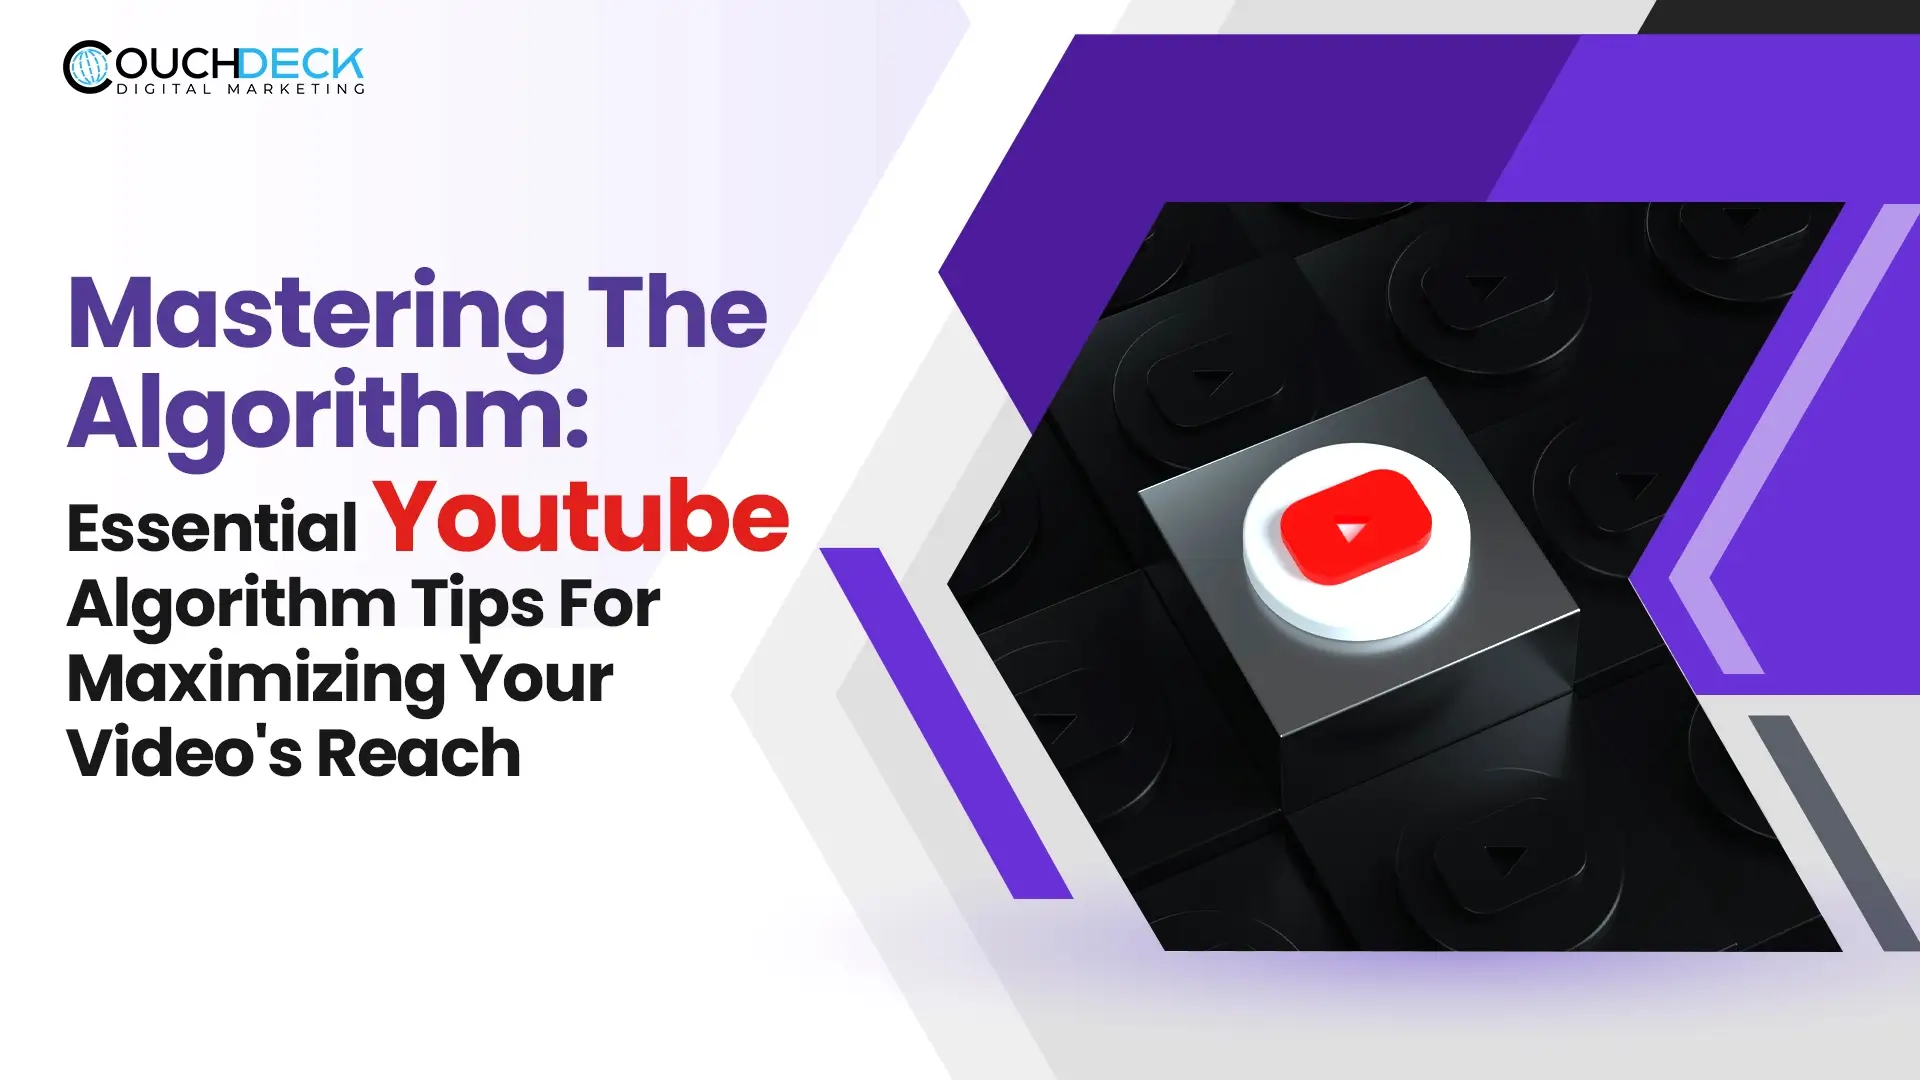 Mastering The Algorithm: Essential Youtube Algorithm Tips For Maximizing Your Video's Reach